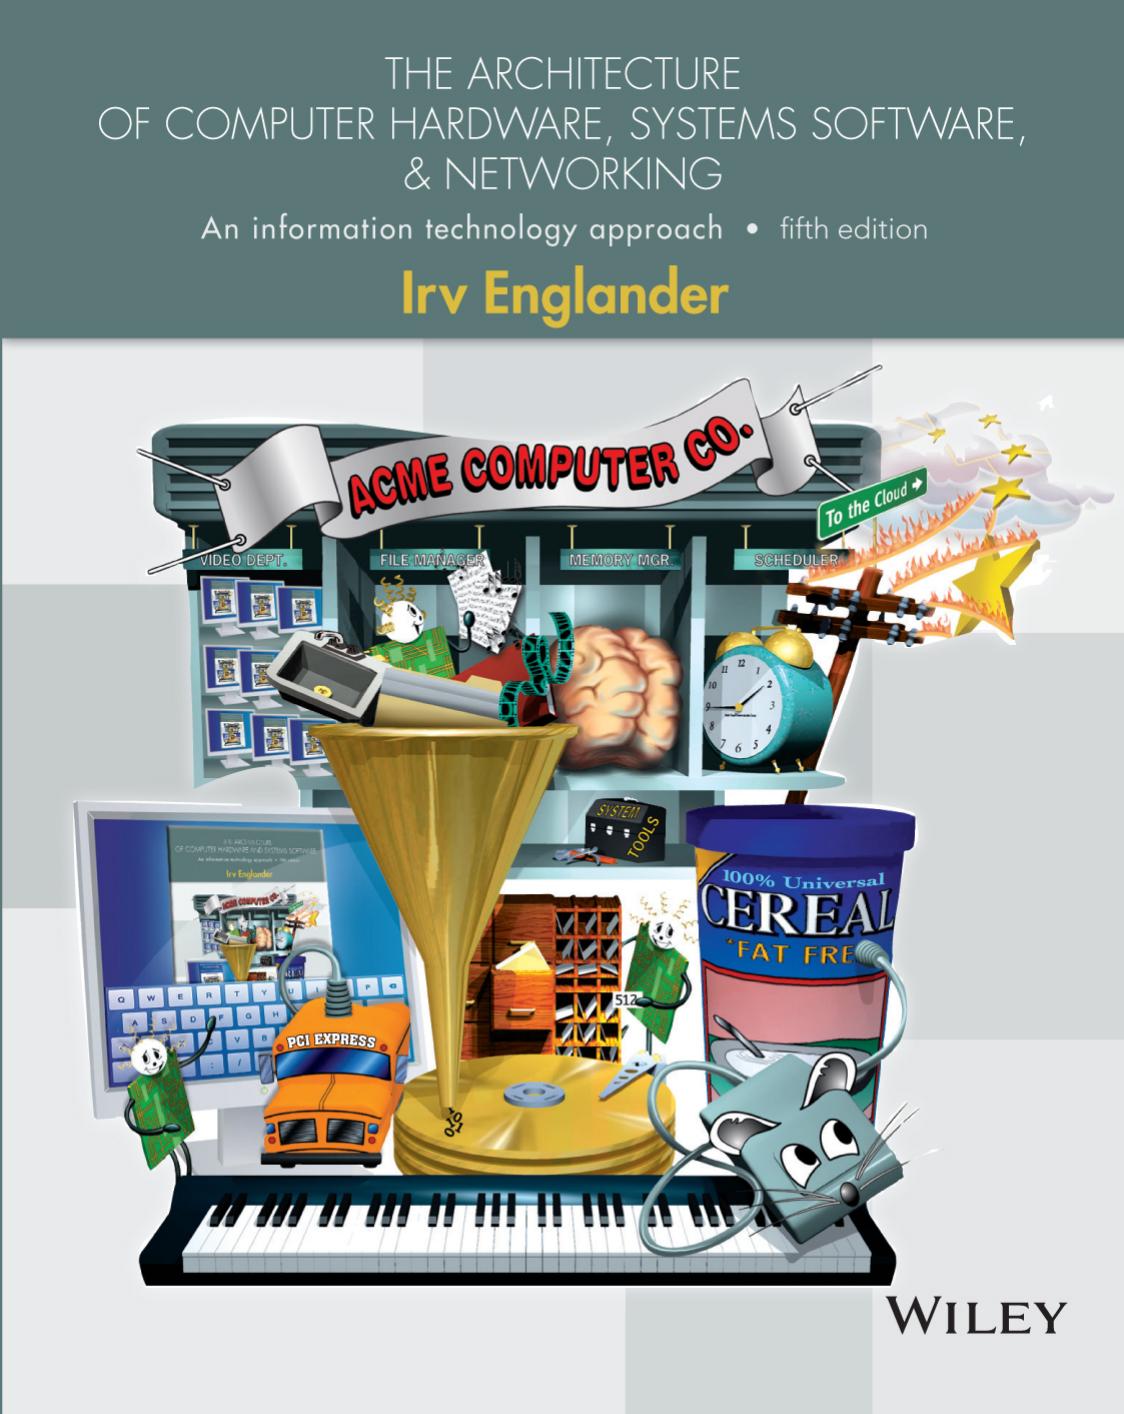 Architecture of Computer Hardware, Systems Software, & Networking, The.jpg